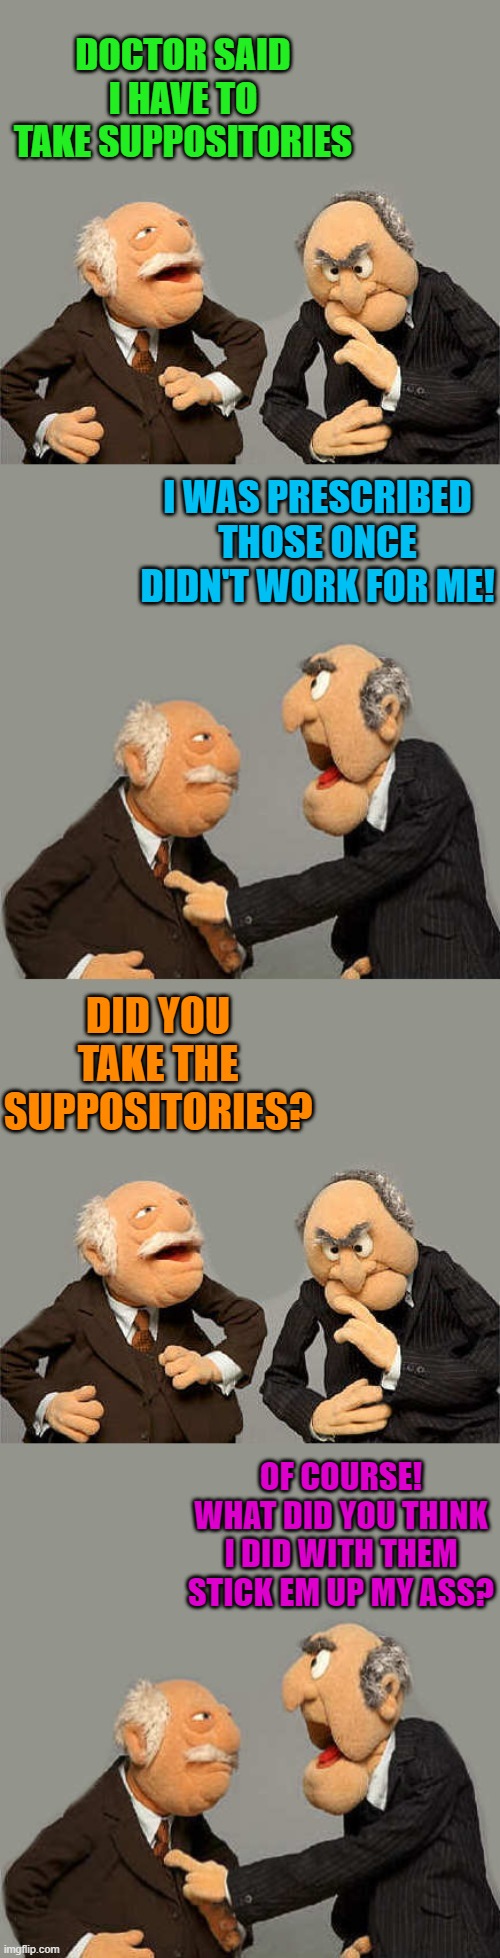 Doctors orders | DOCTOR SAID I HAVE TO TAKE SUPPOSITORIES; I WAS PRESCRIBED THOSE ONCE DIDN'T WORK FOR ME! DID YOU TAKE THE SUPPOSITORIES? OF COURSE!
WHAT DID YOU THINK I DID WITH THEM
STICK EM UP MY ASS? | image tagged in suppositories,joke | made w/ Imgflip meme maker